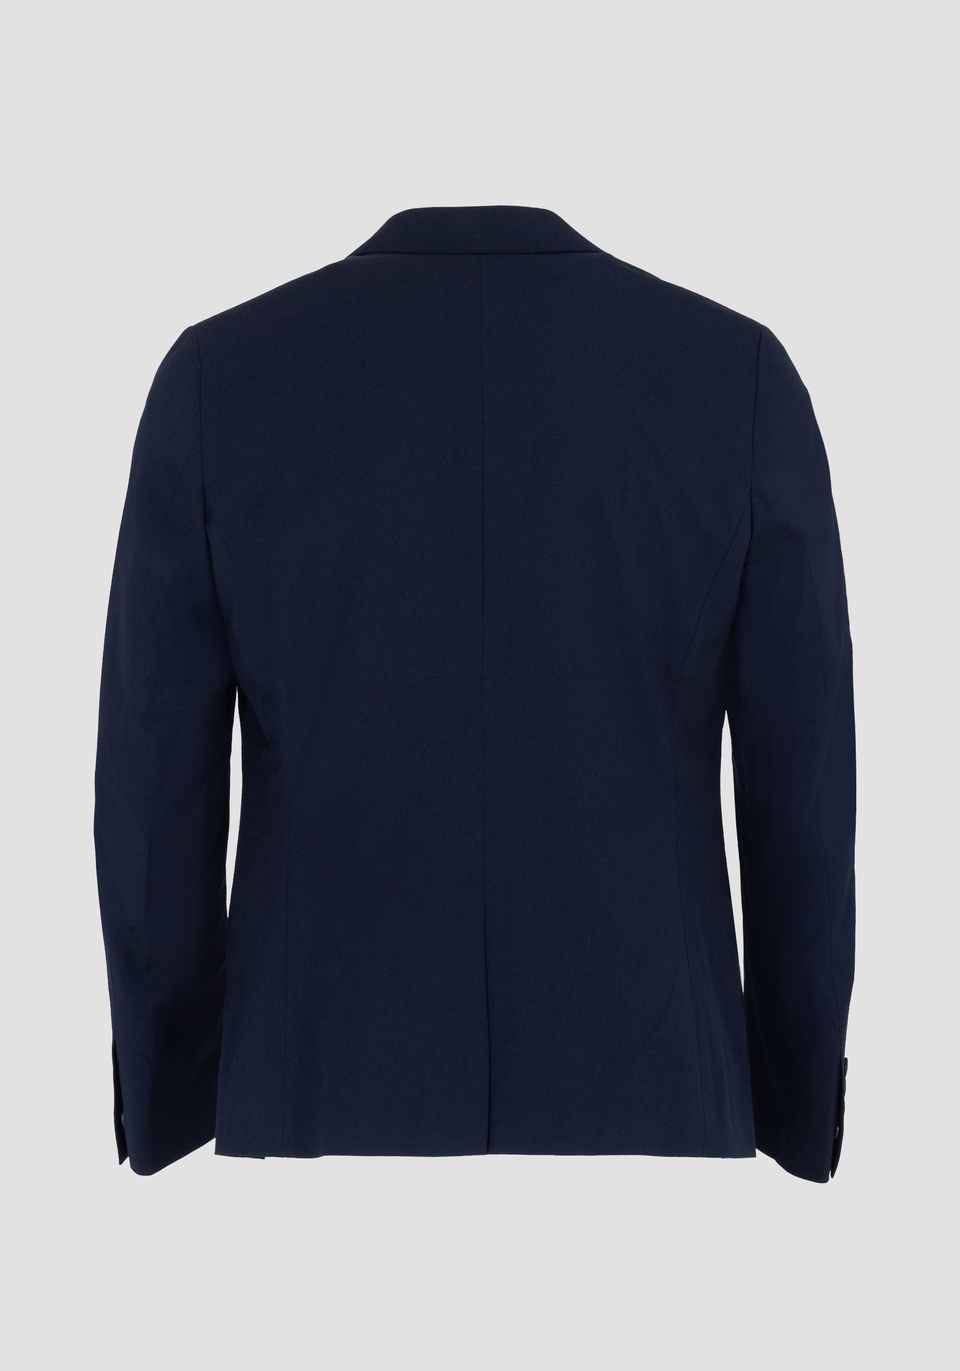 “BONNIE” SLIM-FIT JACKET IN A SOFT-TOUCH FABRIC - Antony Morato Online Shop